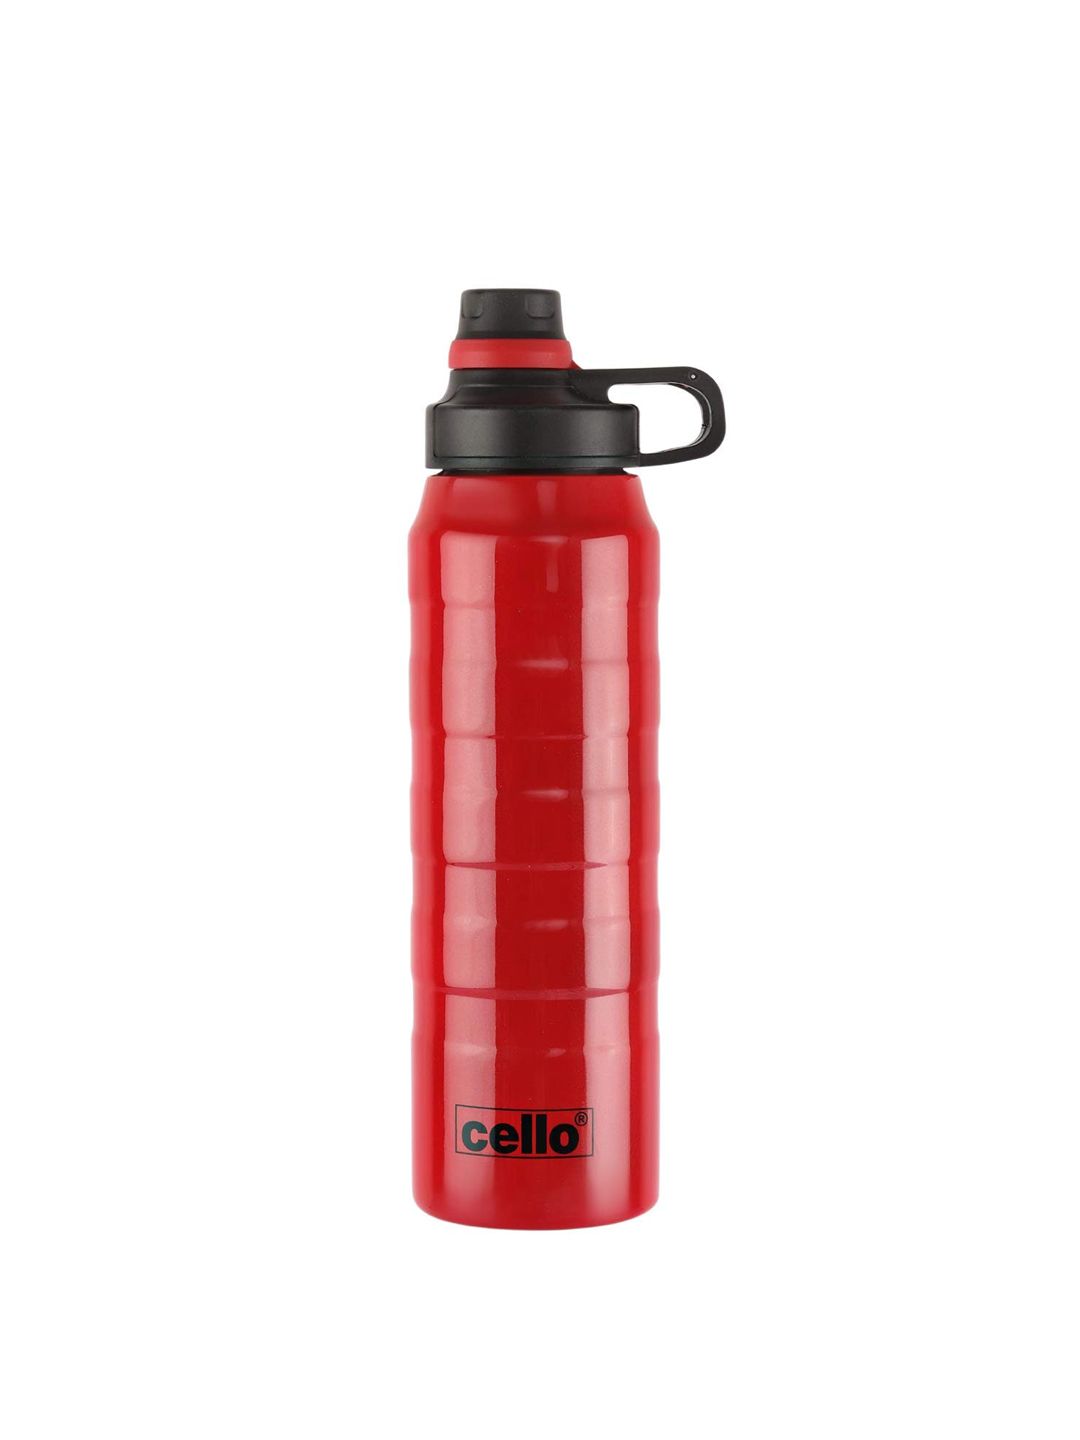 Cello Red Printed Nitro Stainless Steel Bottle 600 ml Price in India